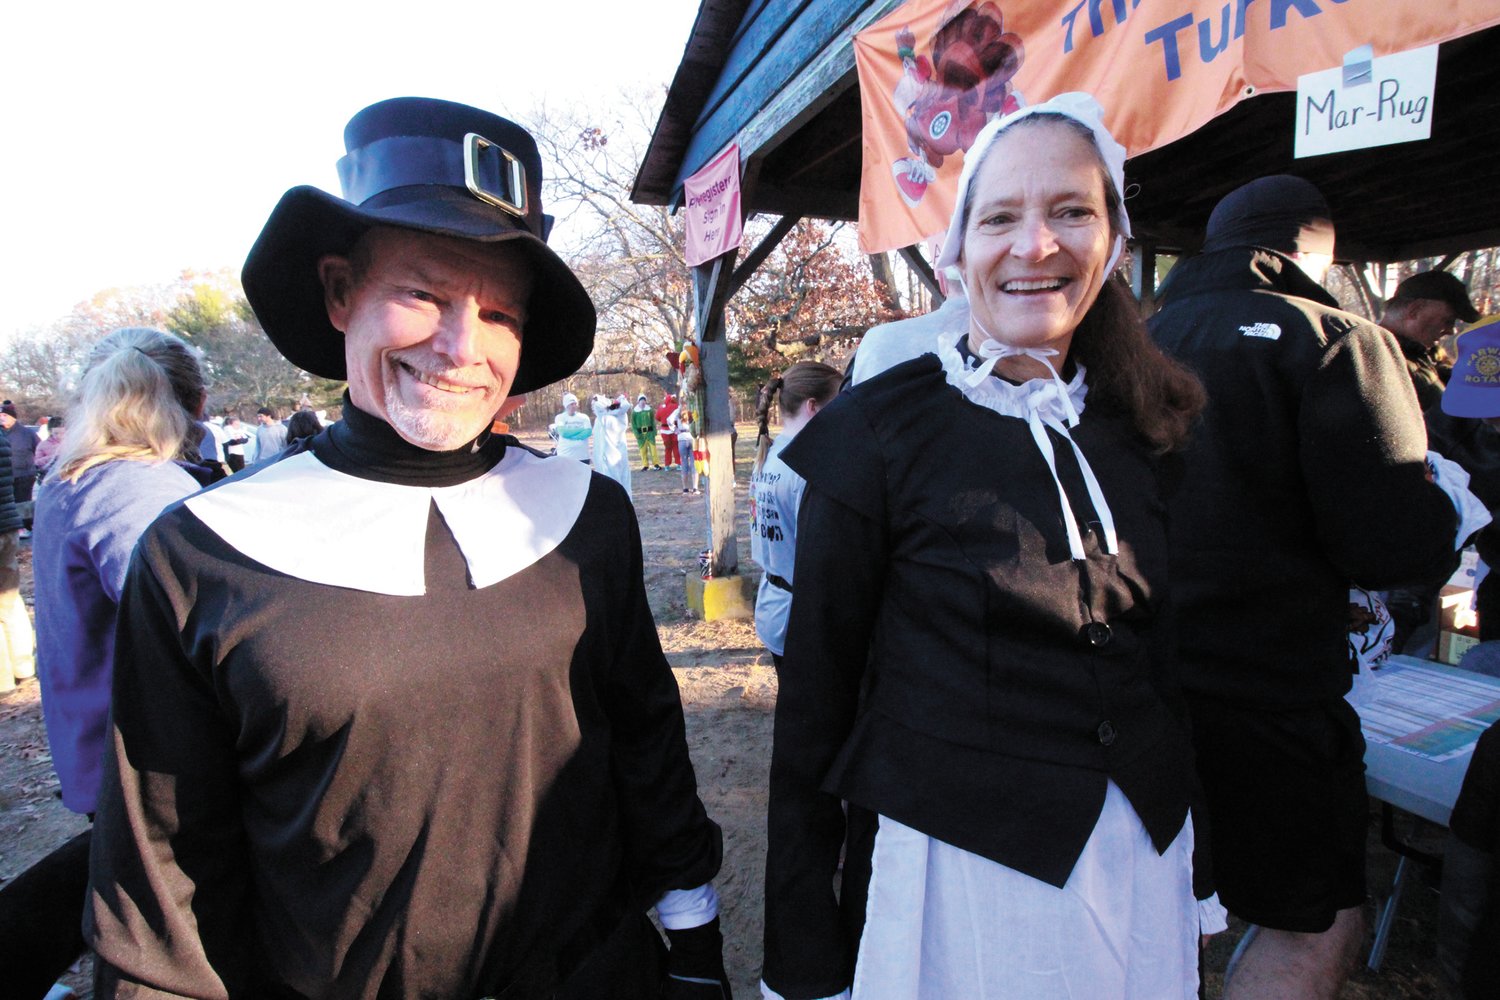 PILGRIM TROTTERS: James and Susan Morgan came appropriately clad for the Thanksgiving 5K.